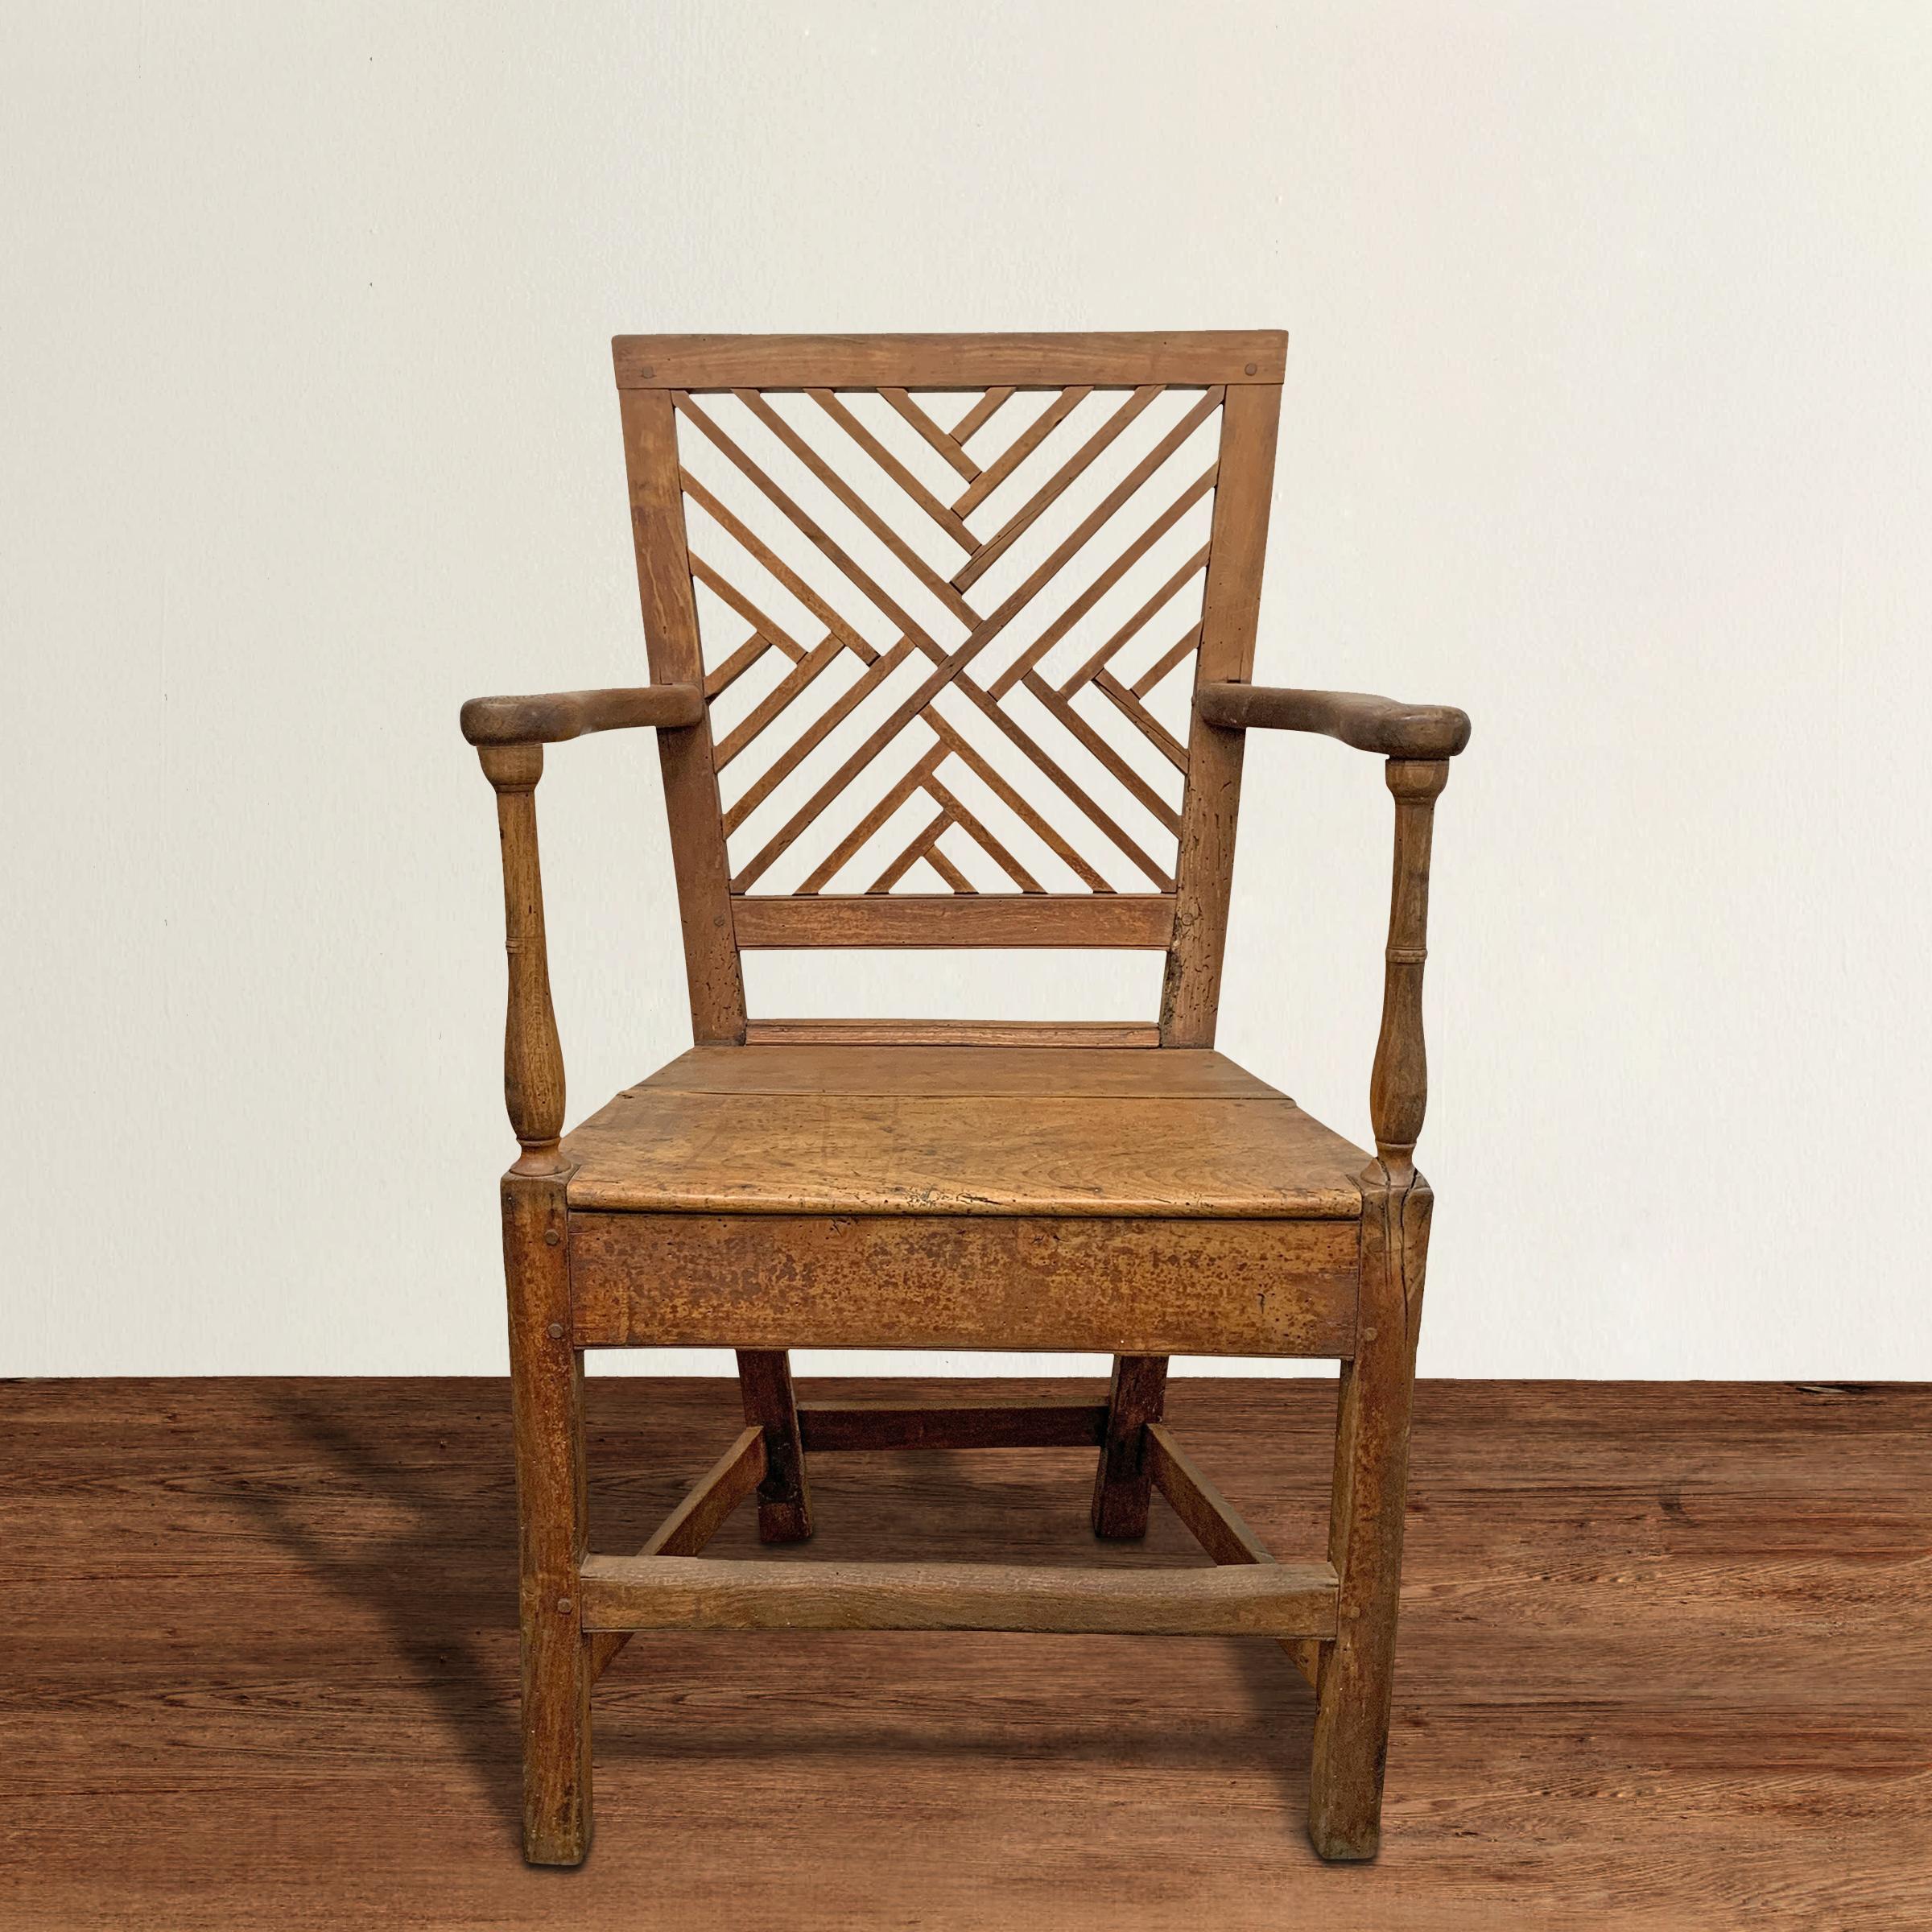 A striking 19th century English elmwood armchair with a fantastic lattice-back, out turned arms with turned supports, with all parts being of pegged construction. This would be so charming with a new cushion!